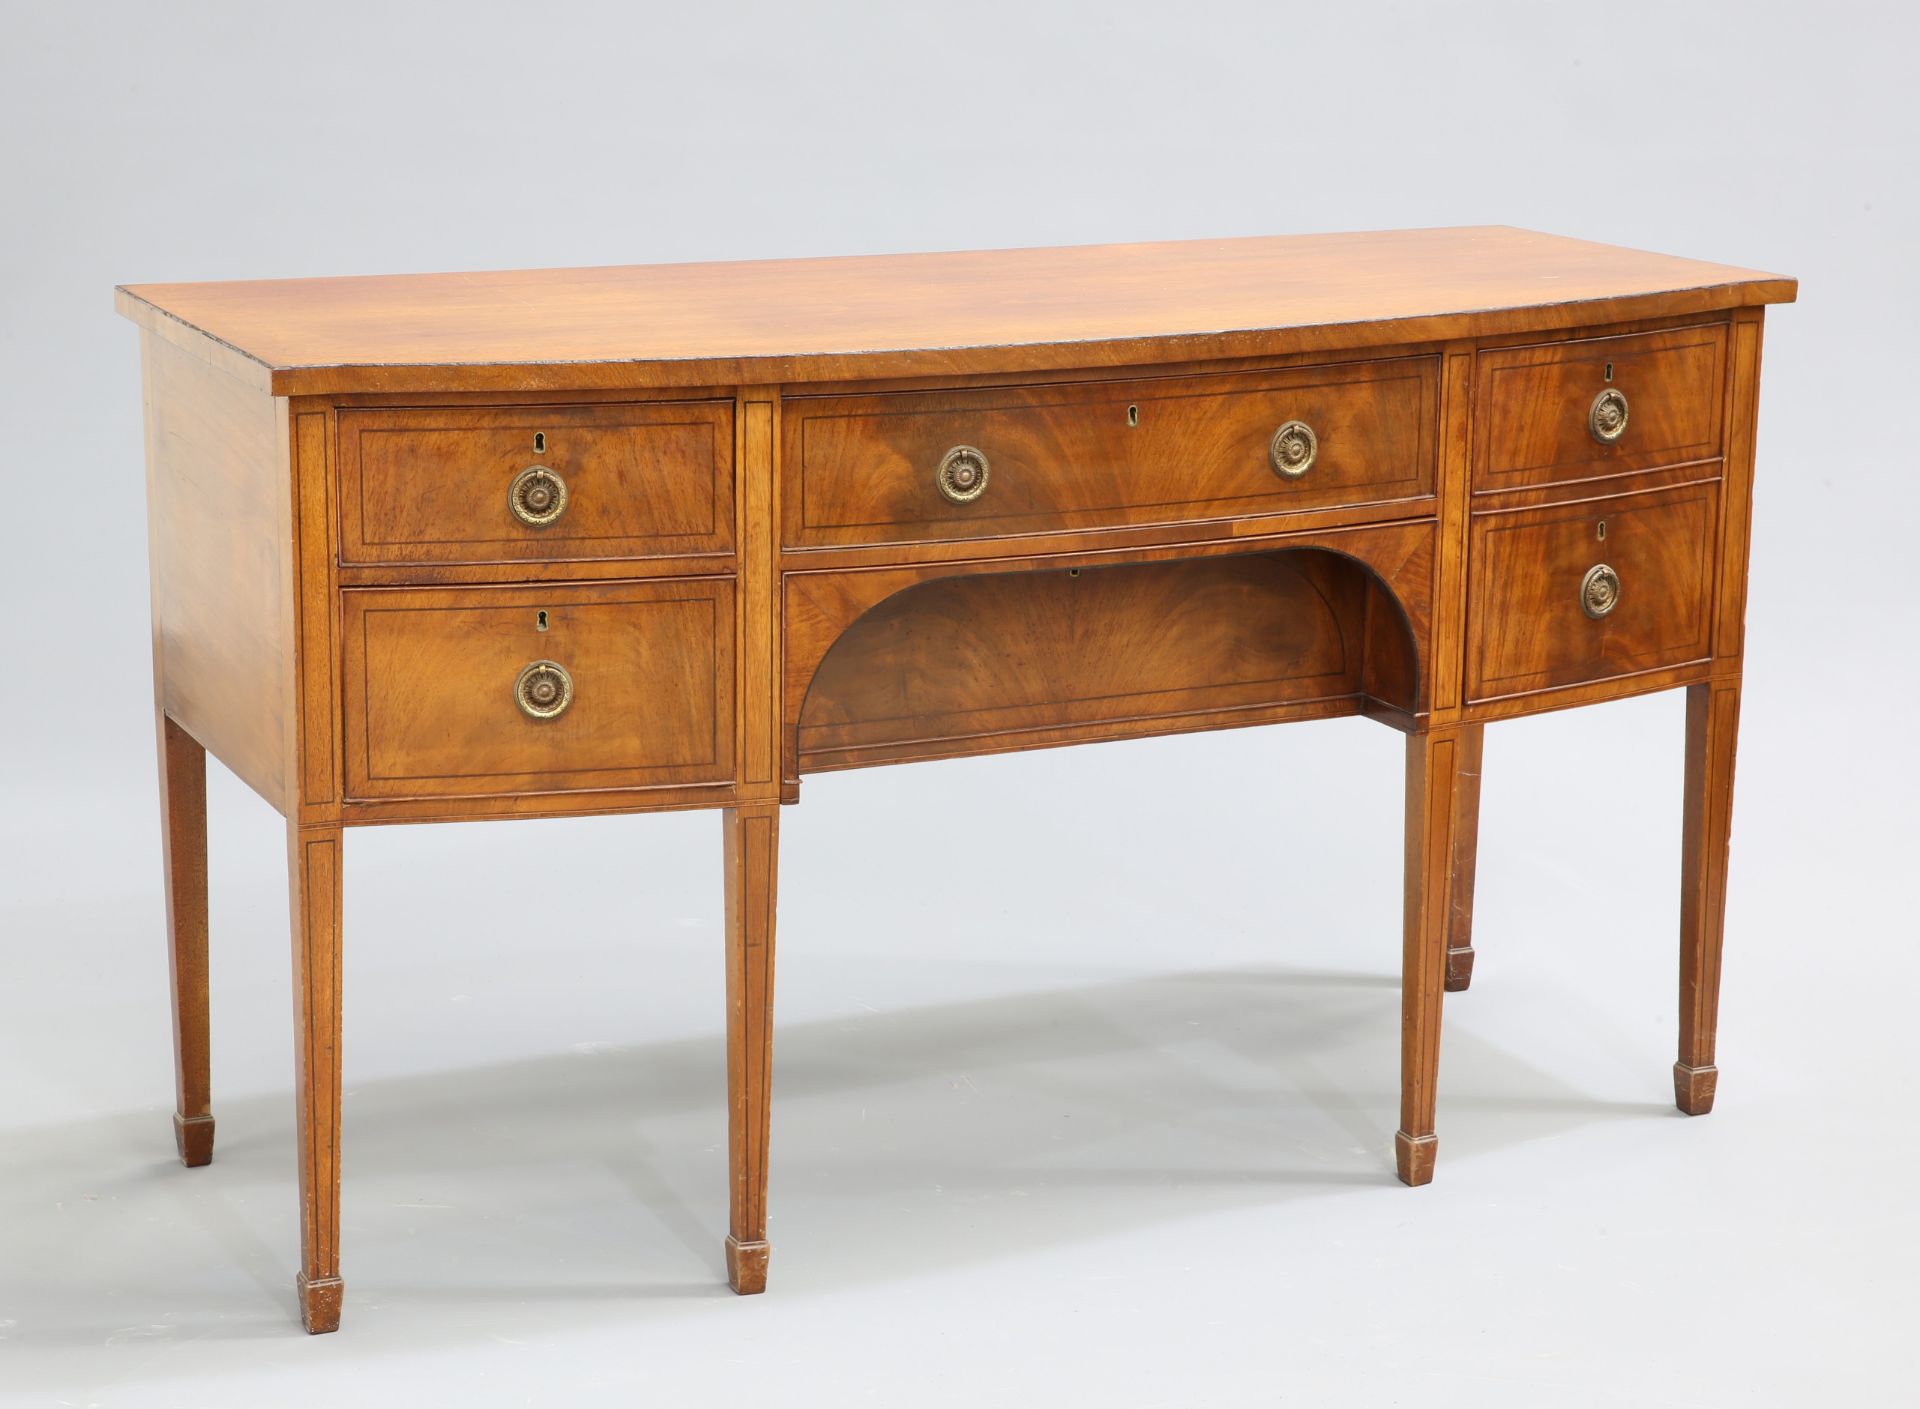 A REGENCY STYLE MAHOGANY BOWFRONTED SIDEBOARD